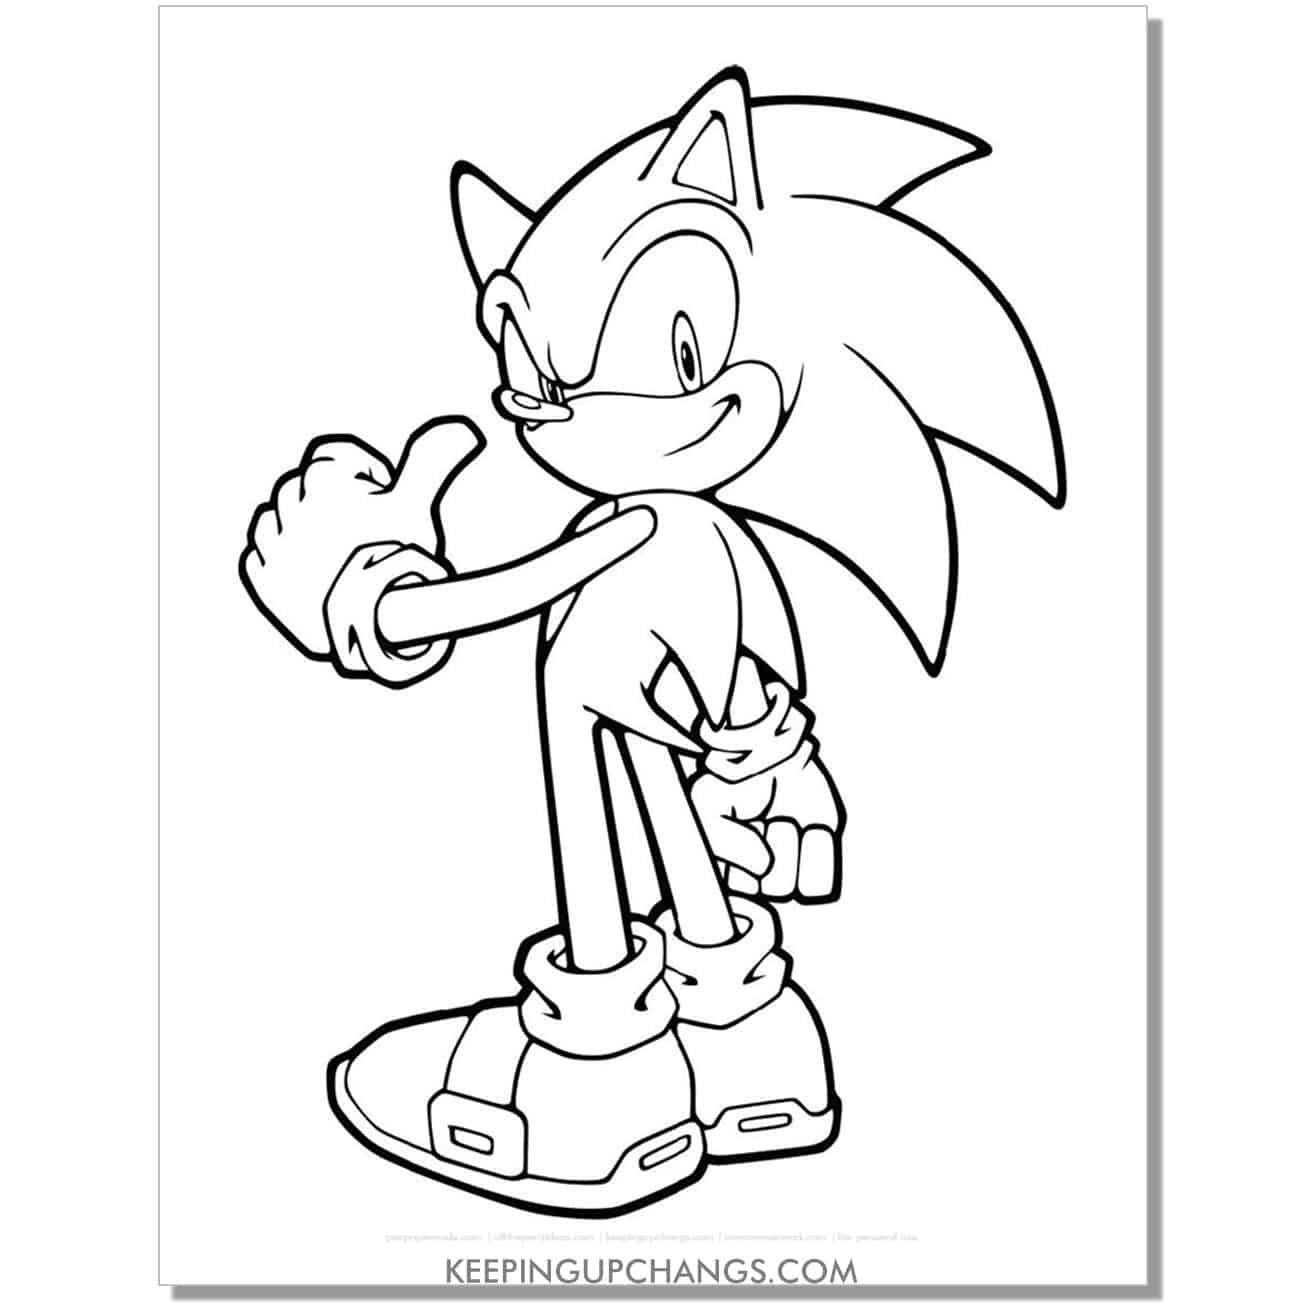 sonic looking back with thumbs up coloring page.